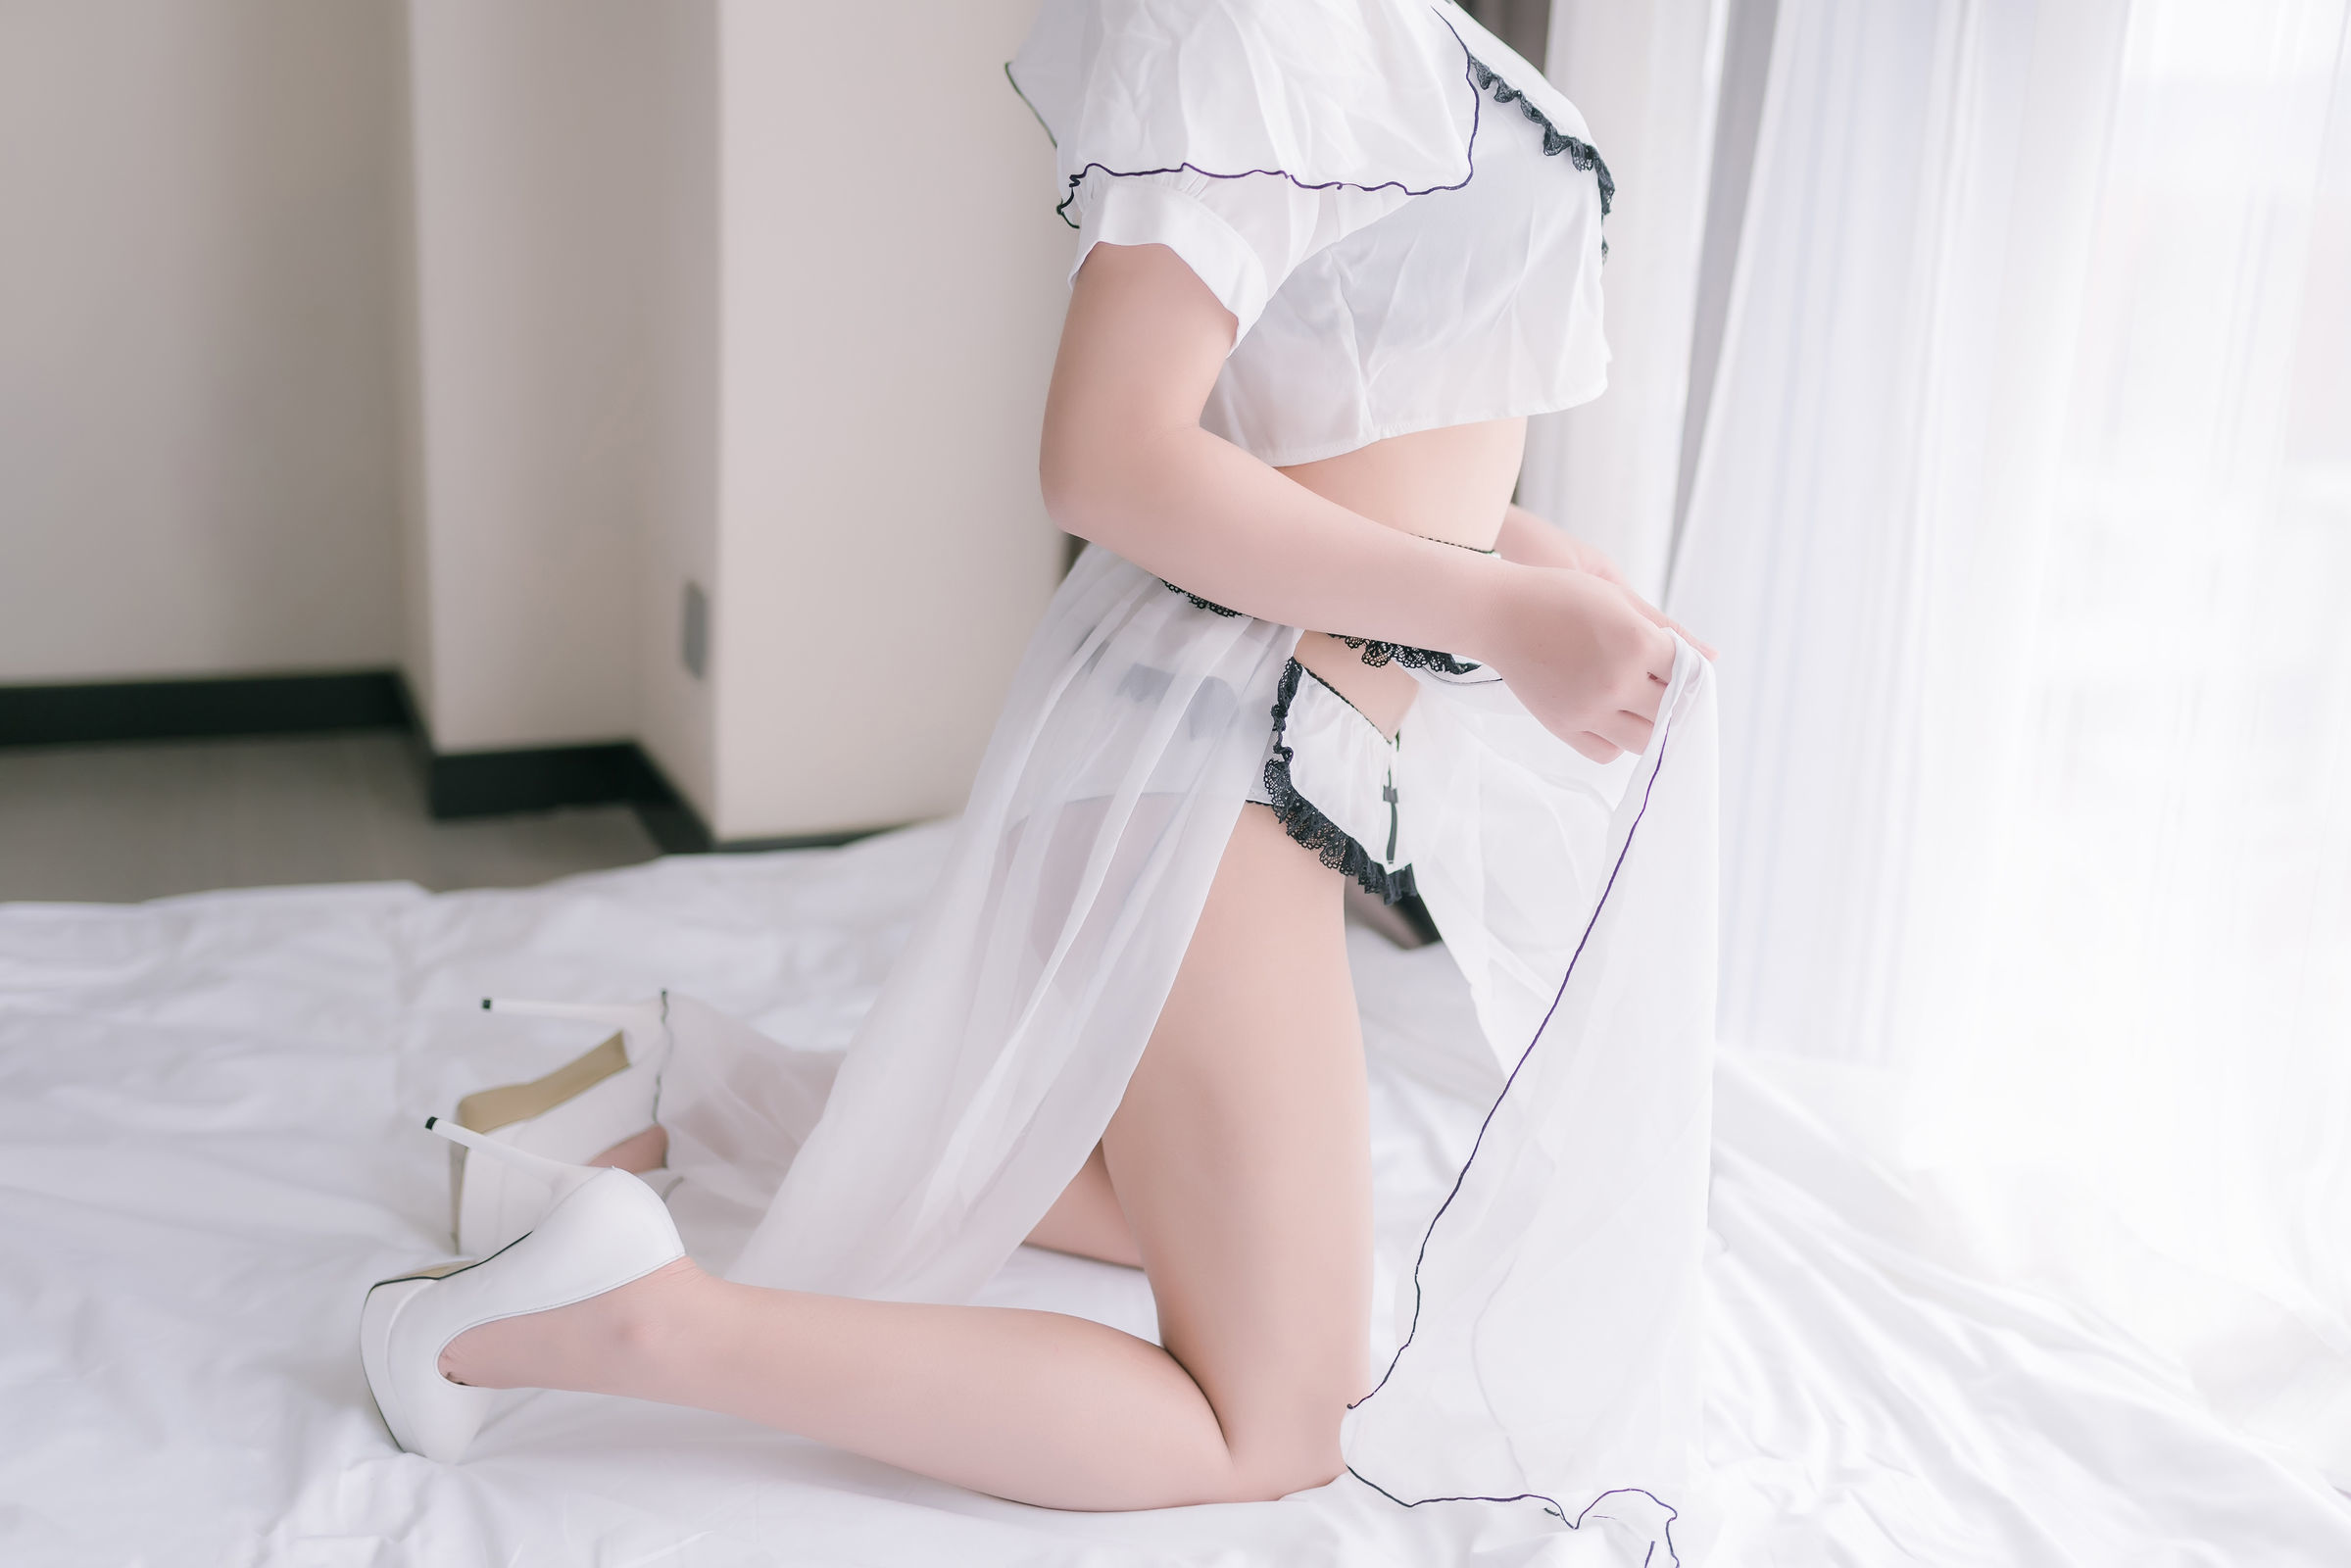 COSER Take the Mozi AA Pure White Mids [COSPLAY Beauty] Photo Album